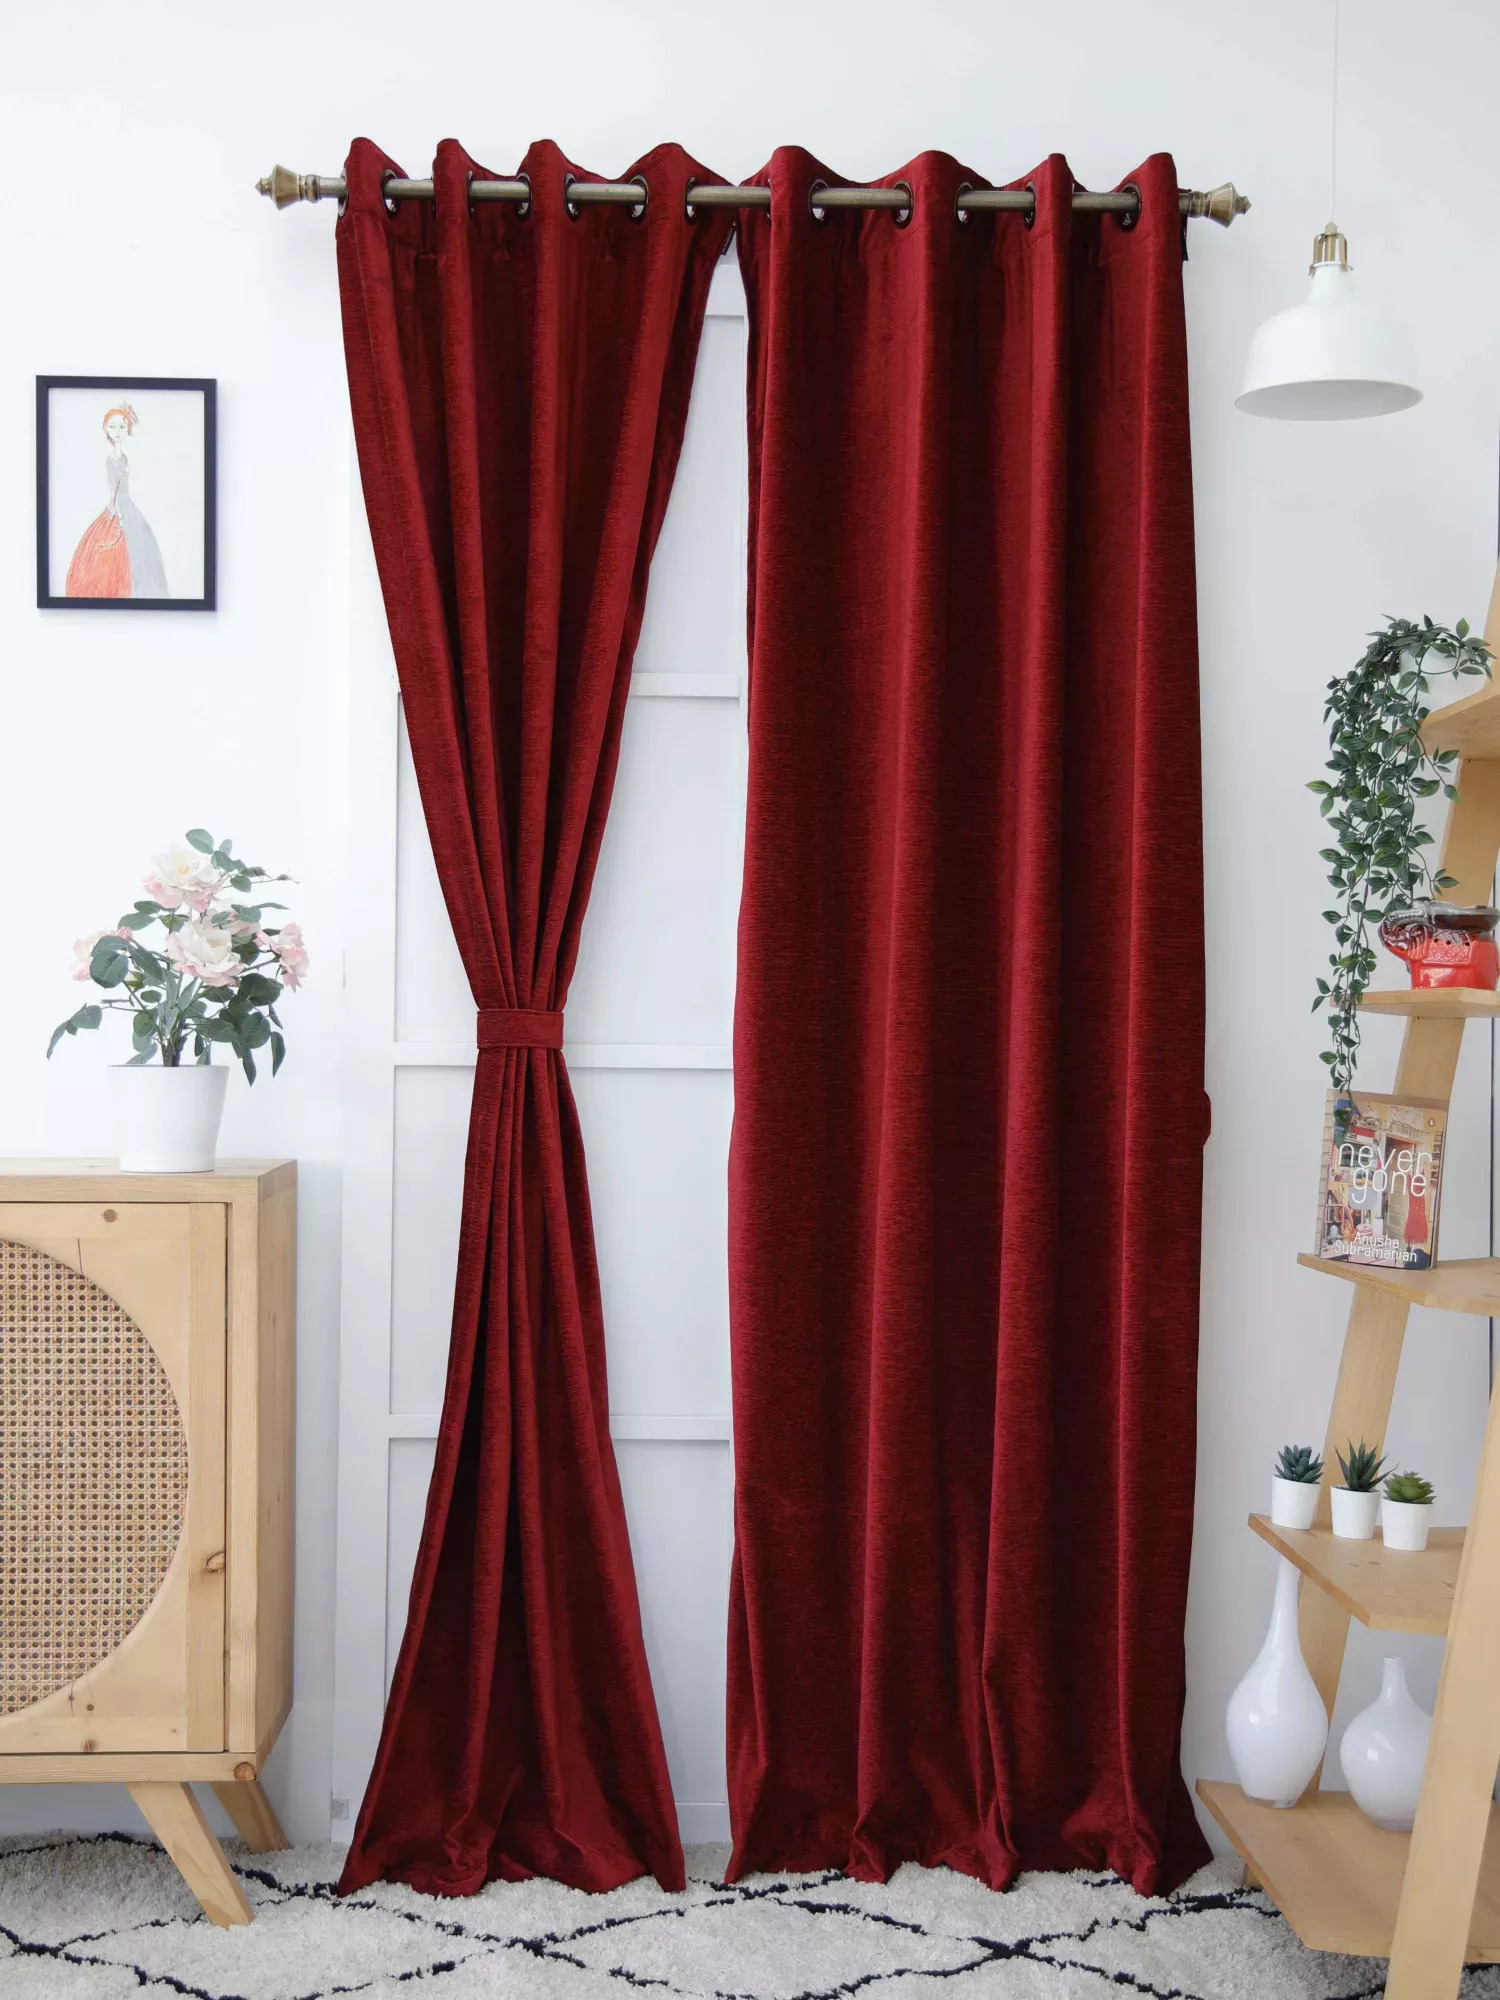 Top 5 Things to Consider When Buying Blackout or Dim out Curtains